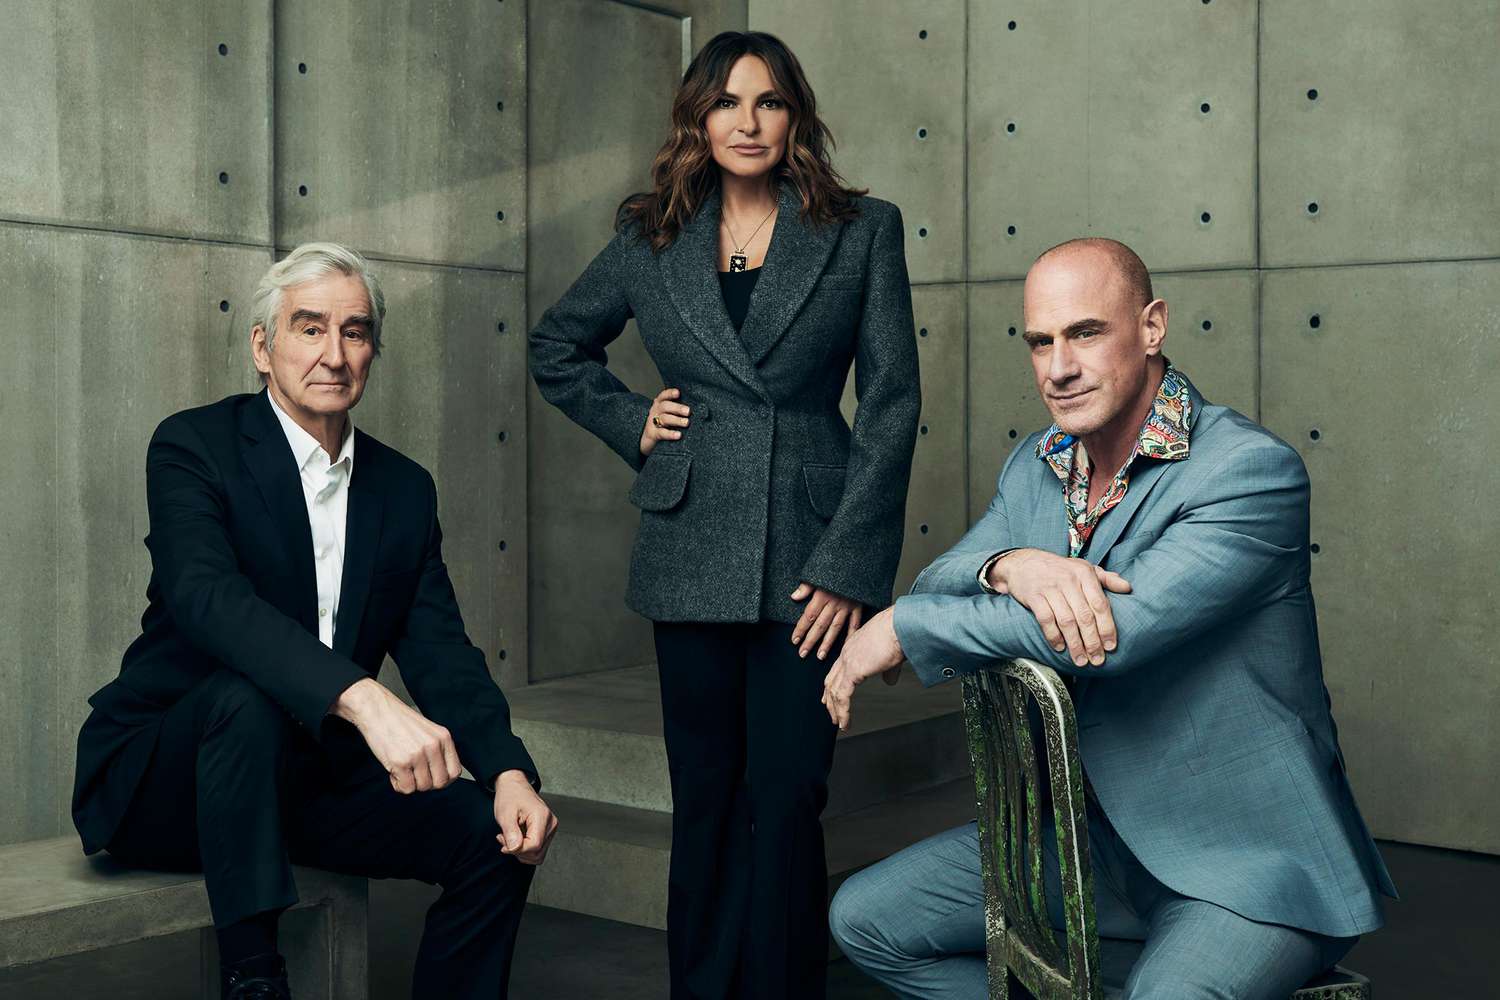 Law and Order Crossover event Law & Order Press Day -- Pictured: (l-r) Law & Order" ; Sam Waterston, Law & Order: Special Victims Unit; Mariska Hargitay, Law & Order: Organized Crime; Chris Meloni